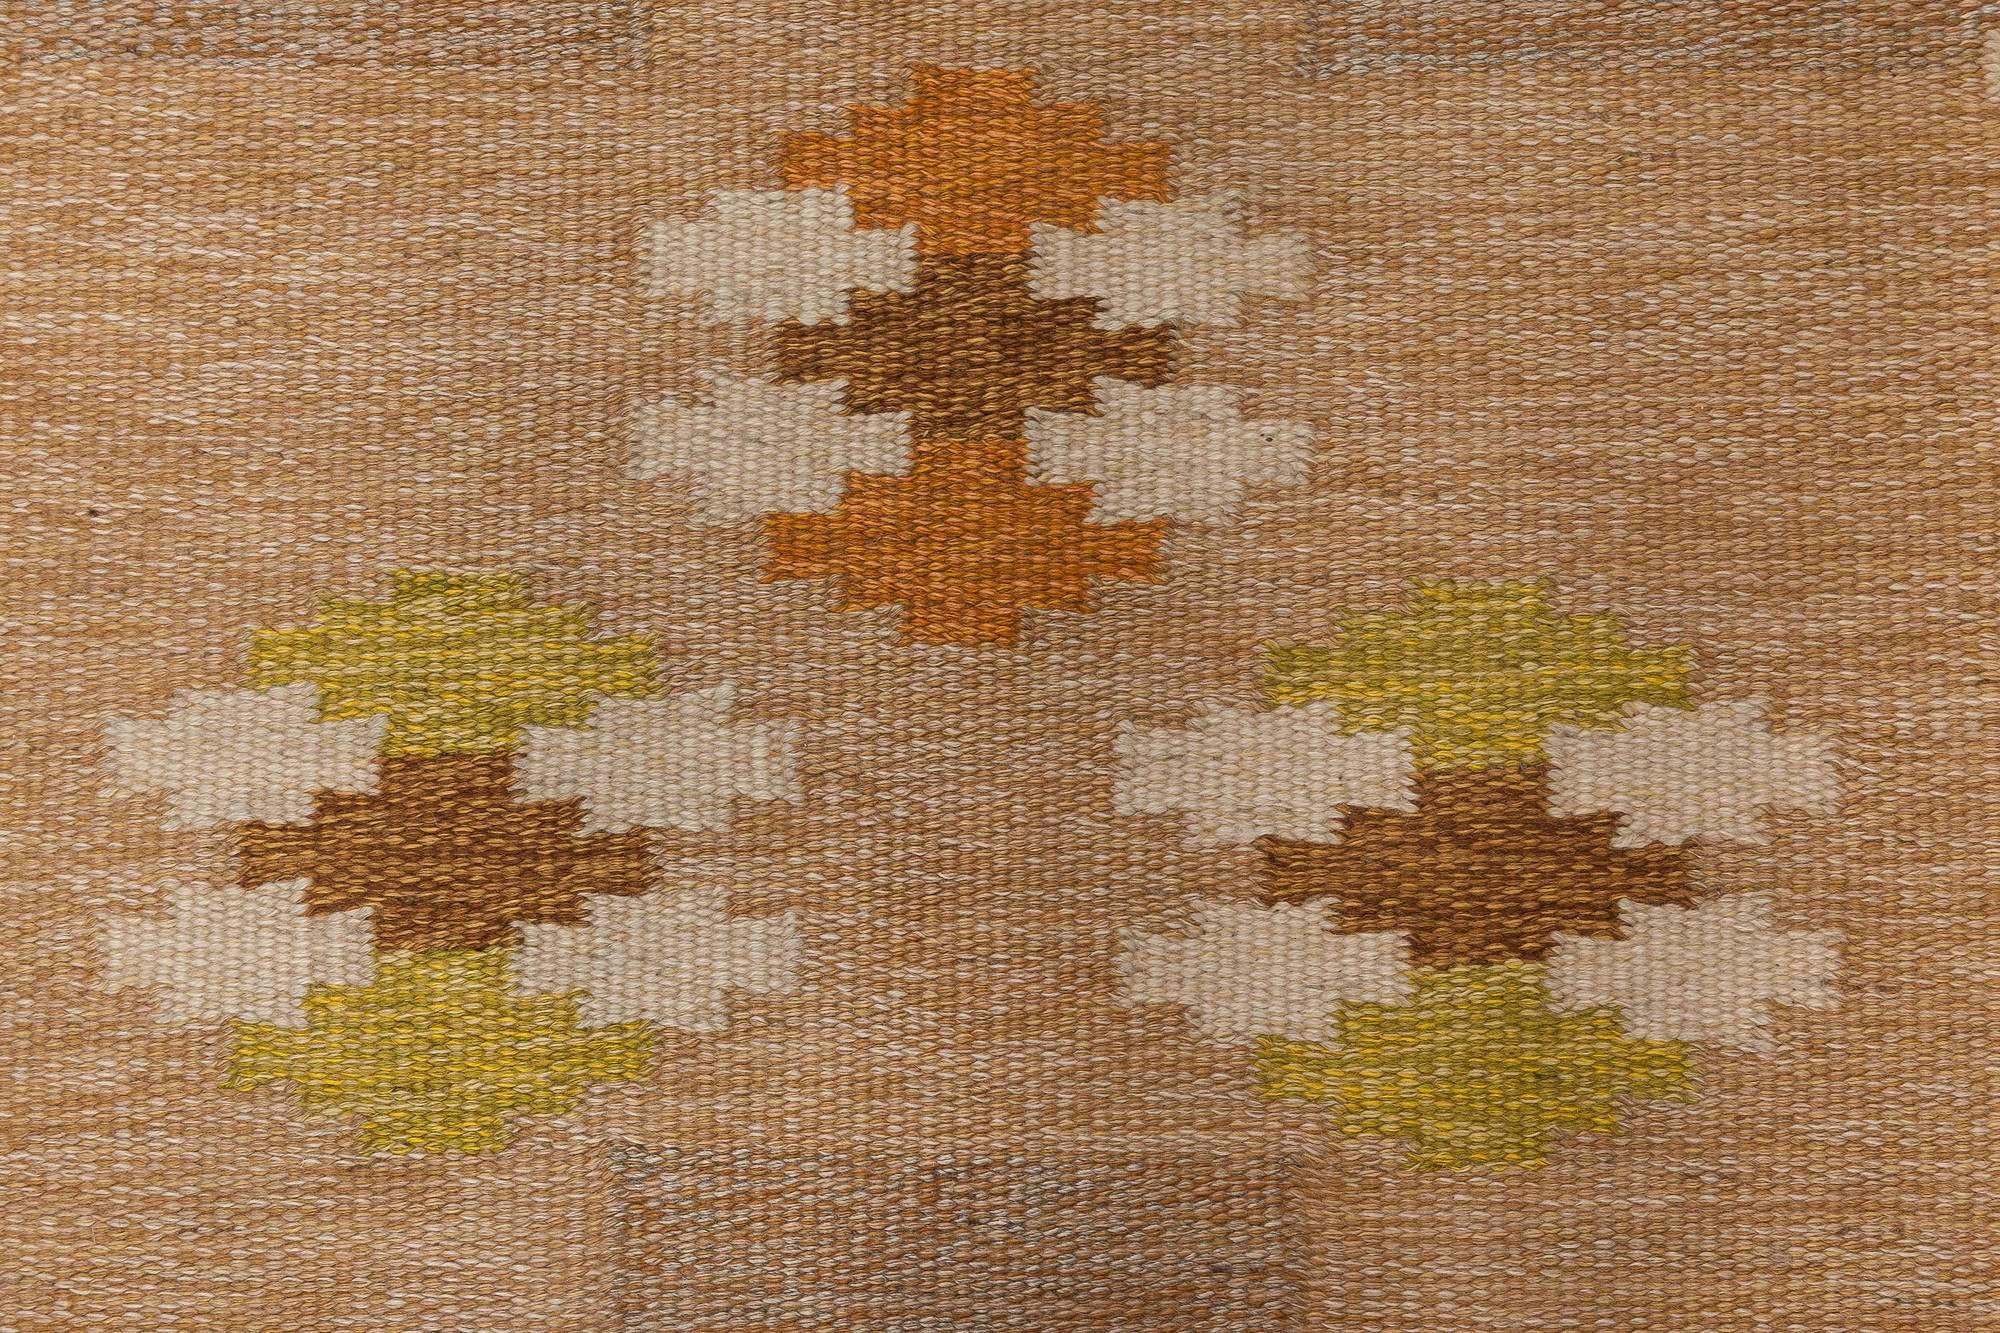 Mid-20th century Swedish flat-weave wool rug signed by Ingegerd Silow
Size: 4'5